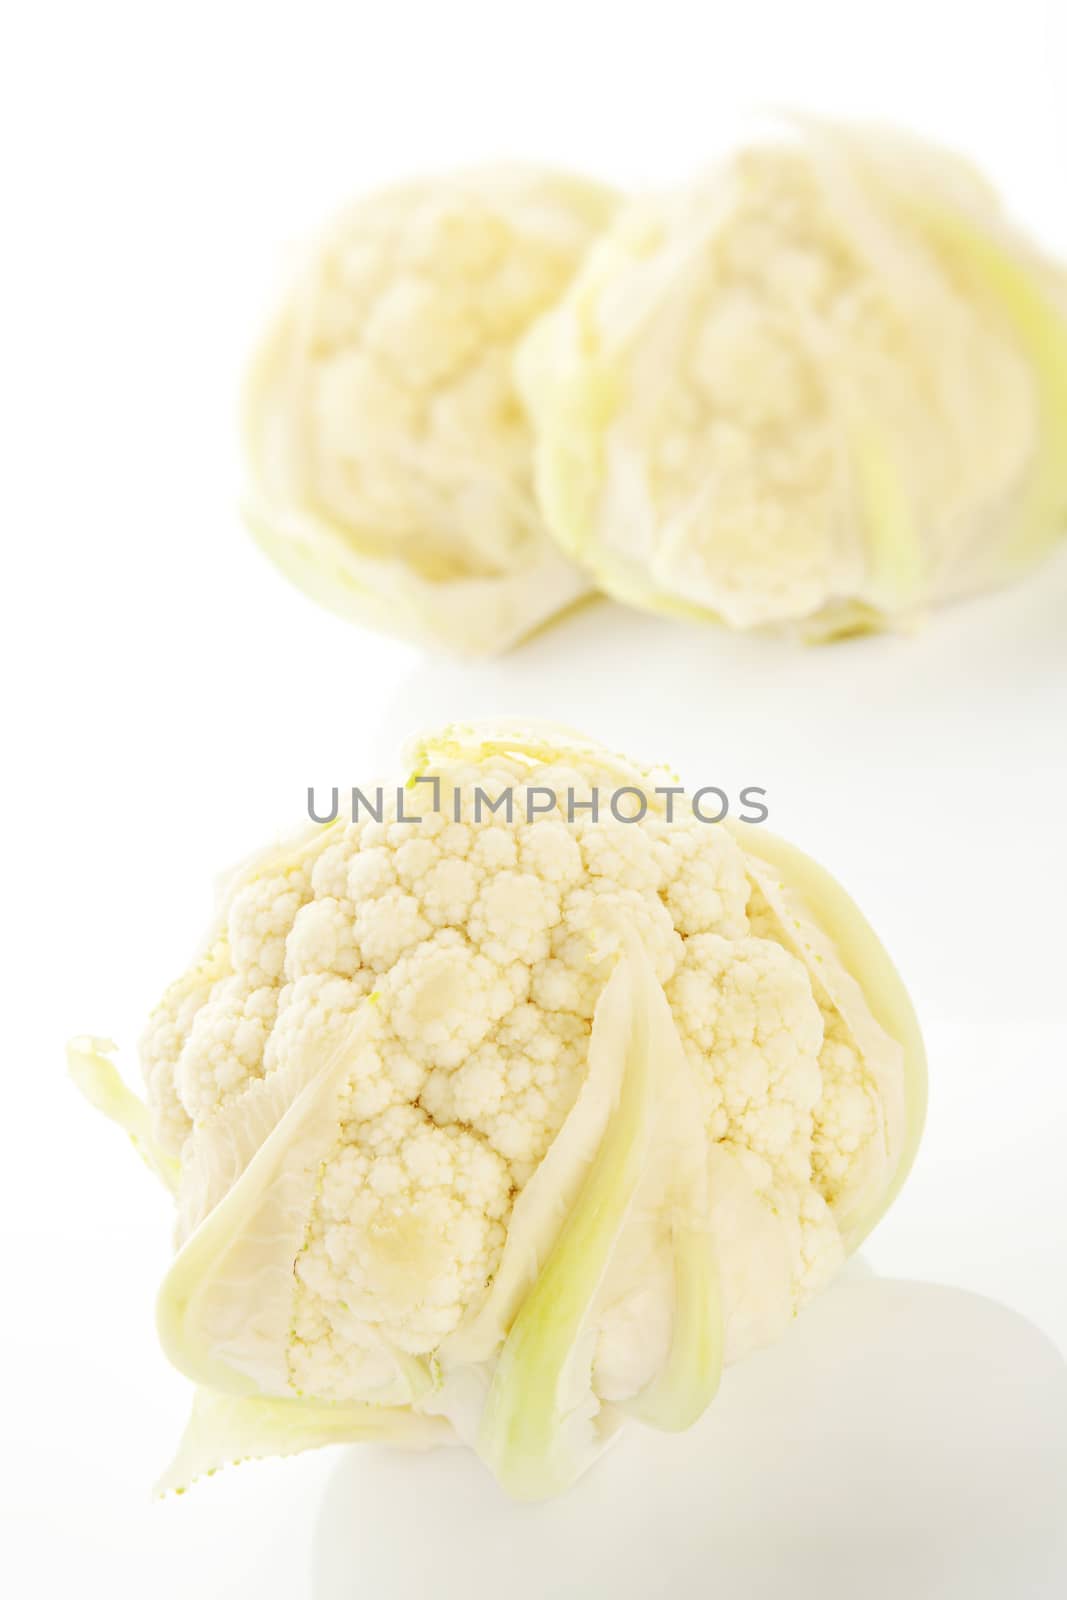 Raw baby cauliflower on white background. Culinary healthy vegetable concept.